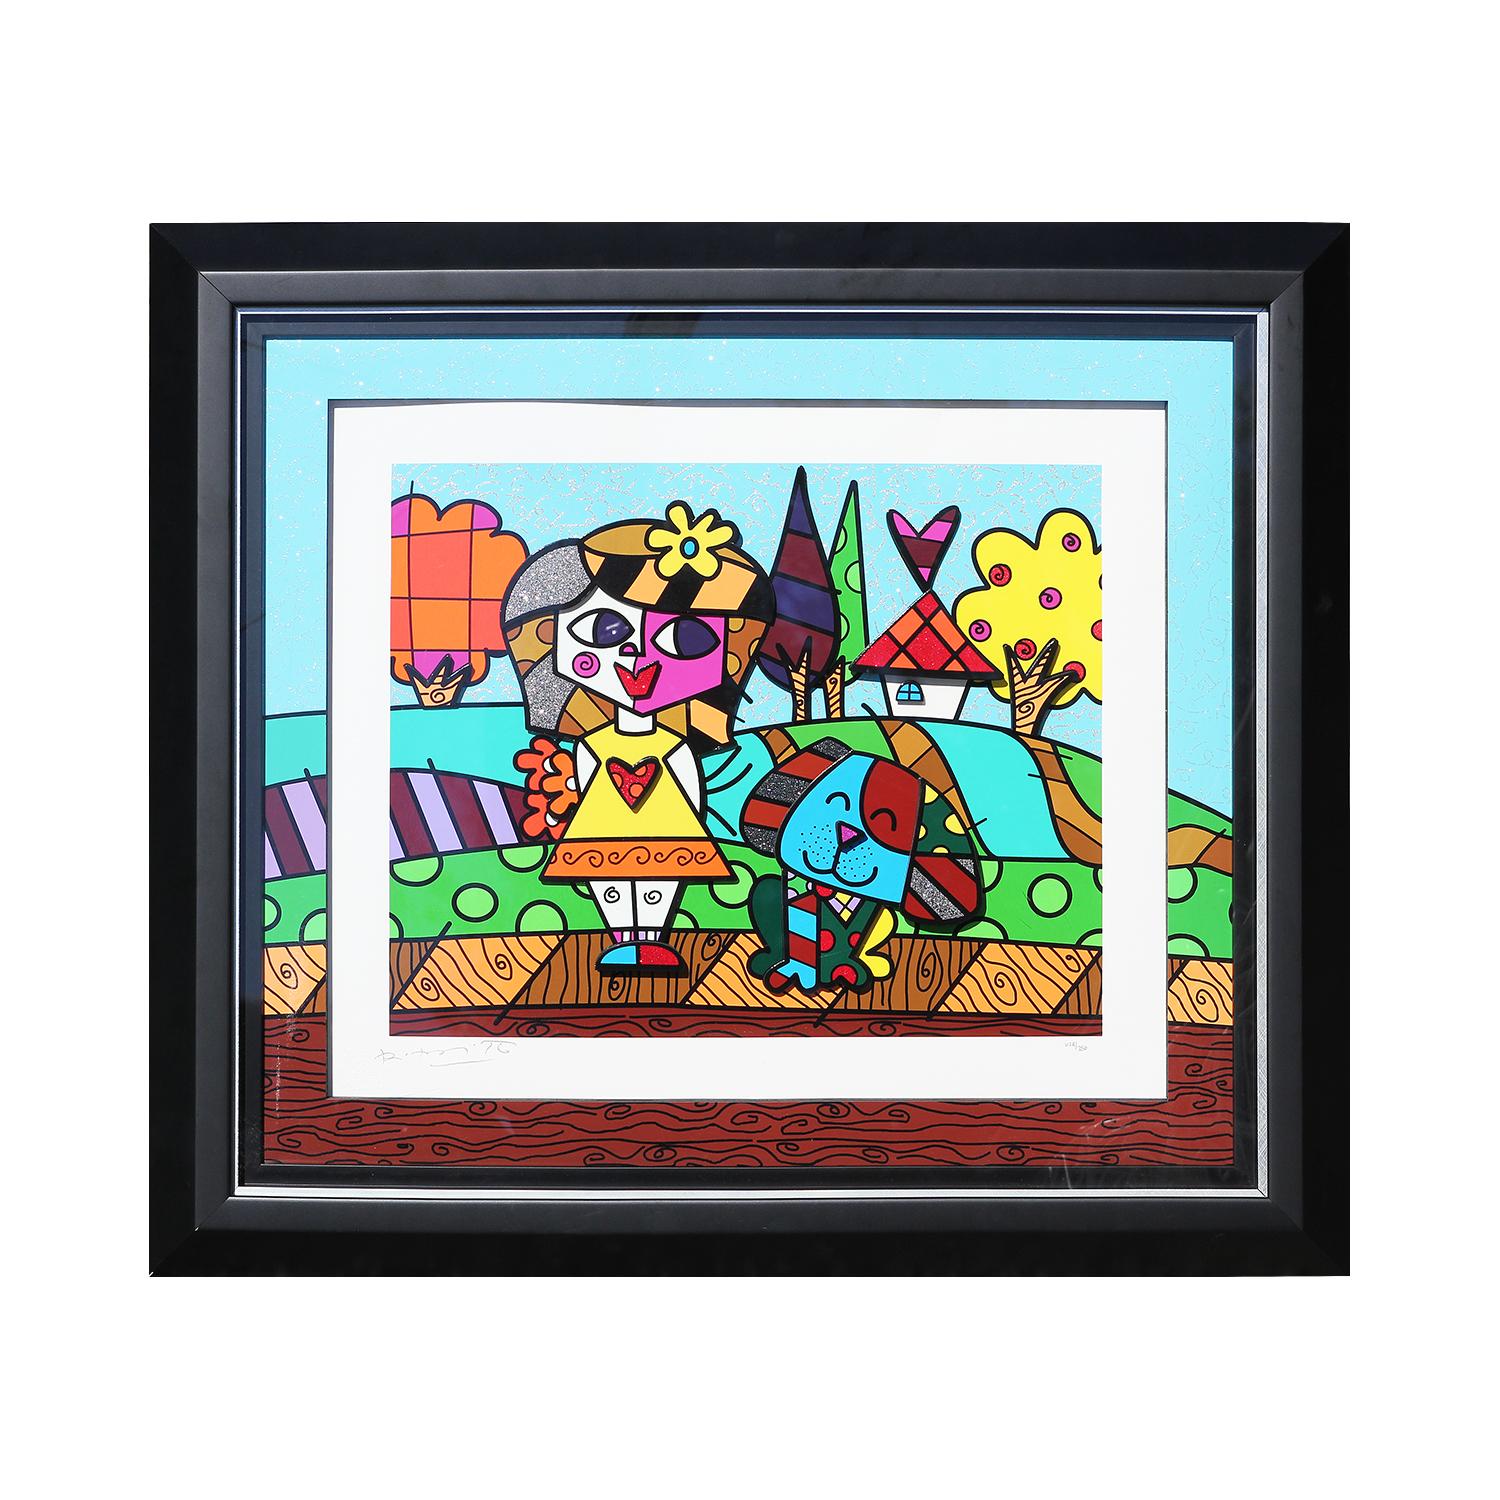 “Fall” Colorful Three Dimensional Abstract Serigraph Edition 628 of 750  - Print by Romero Britto